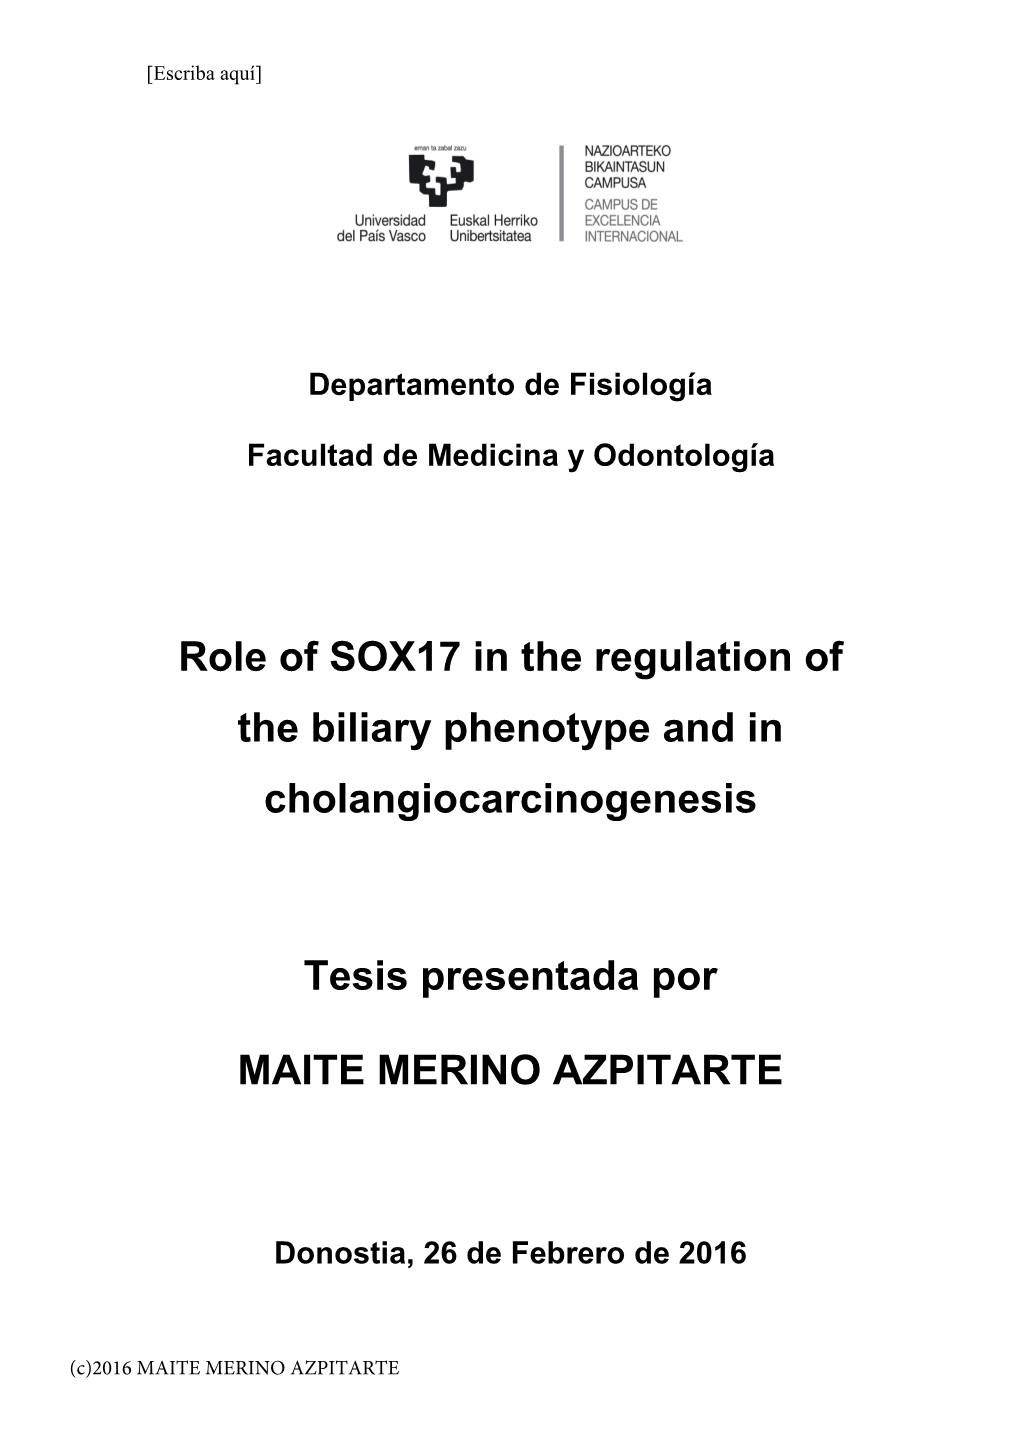 Role of SOX17 in the Regulation of the Biliary Phenotype and in Cholangiocarcinogenesis